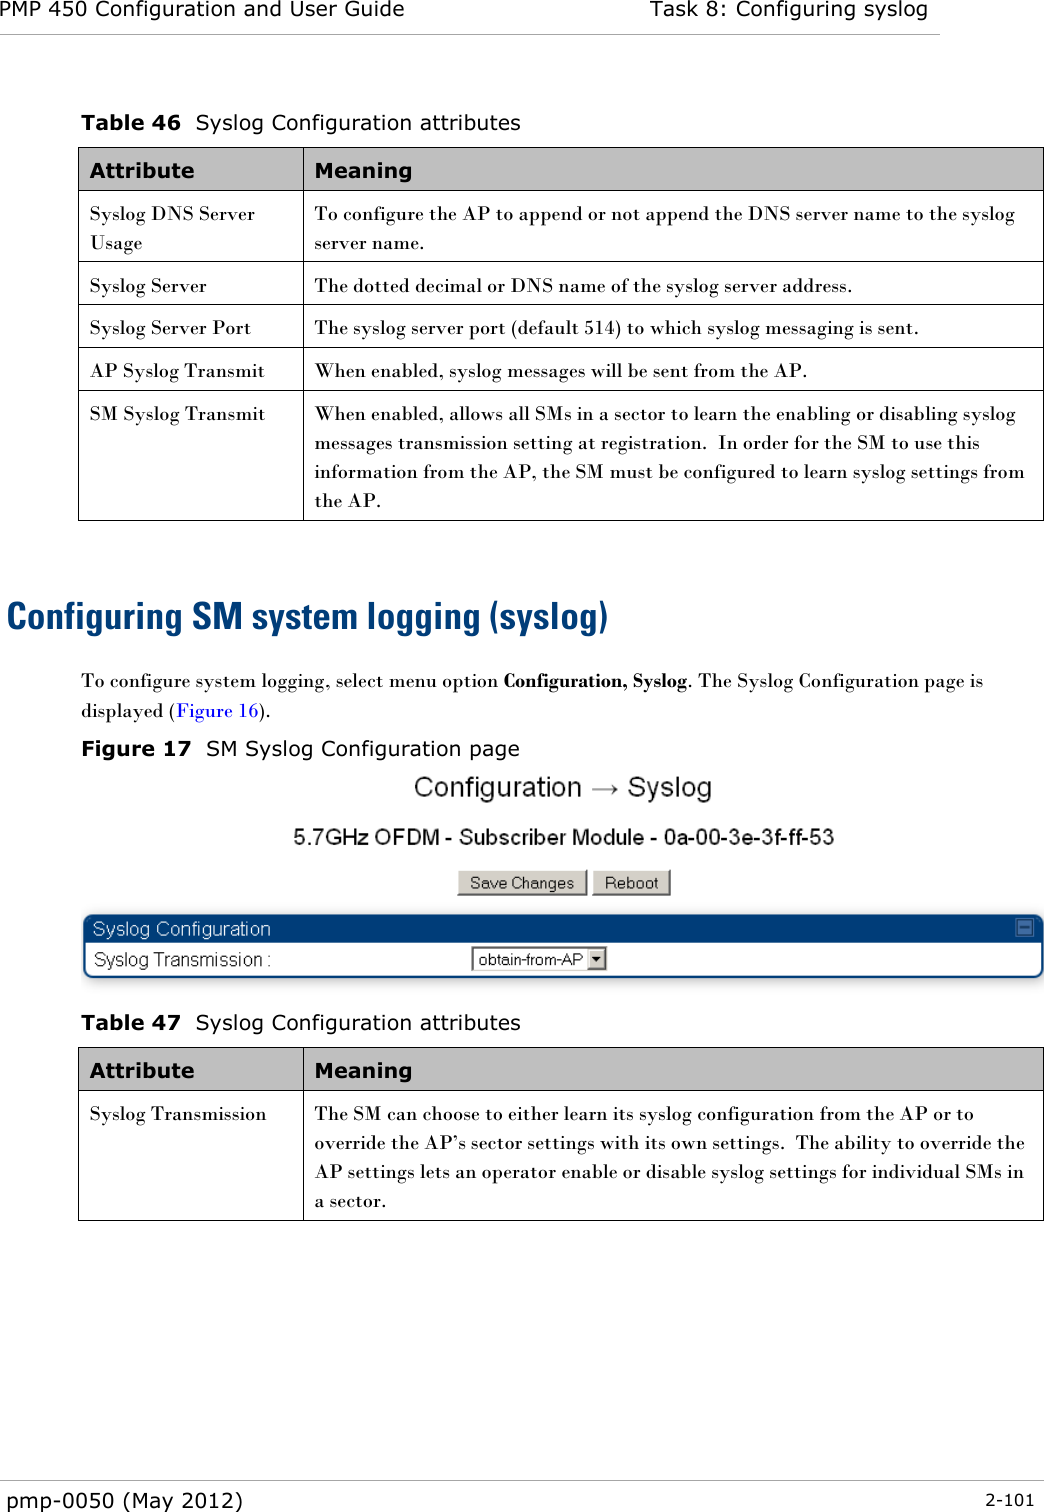 PMP 450 Configuration and User Guide Task 8: Configuring syslog  pmp-0050 (May 2012)  2-101  Table 46  Syslog Configuration attributes Attribute Meaning Syslog DNS Server Usage To configure the AP to append or not append the DNS server name to the syslog server name. Syslog Server The dotted decimal or DNS name of the syslog server address. Syslog Server Port The syslog server port (default 514) to which syslog messaging is sent. AP Syslog Transmit When enabled, syslog messages will be sent from the AP. SM Syslog Transmit When enabled, allows all SMs in a sector to learn the enabling or disabling syslog messages transmission setting at registration.  In order for the SM to use this information from the AP, the SM must be configured to learn syslog settings from the AP.  Configuring SM system logging (syslog) To configure system logging, select menu option Configuration, Syslog. The Syslog Configuration page is displayed (Figure 16).  Figure 17  SM Syslog Configuration page  Table 47  Syslog Configuration attributes Attribute Meaning Syslog Transmission The SM can choose to either learn its syslog configuration from the AP or to override the AP‘s sector settings with its own settings.  The ability to override the AP settings lets an operator enable or disable syslog settings for individual SMs in a sector.    